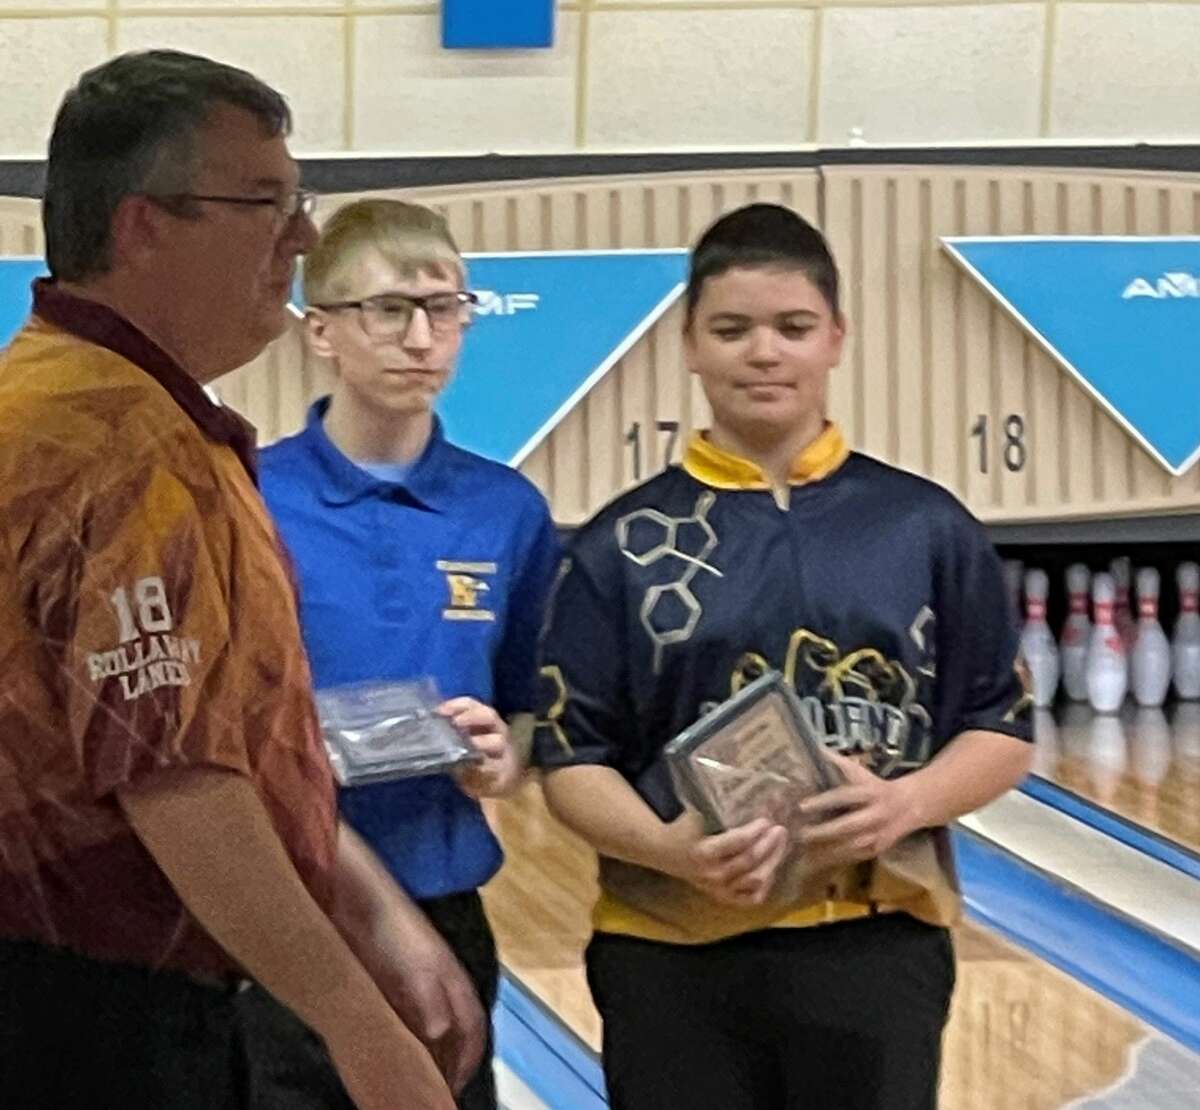 Midland High's Evan Daly (right) receives his all-tournament plaque after his performance at a tourney held at Bay City's Monitor Lanes earlier this season.